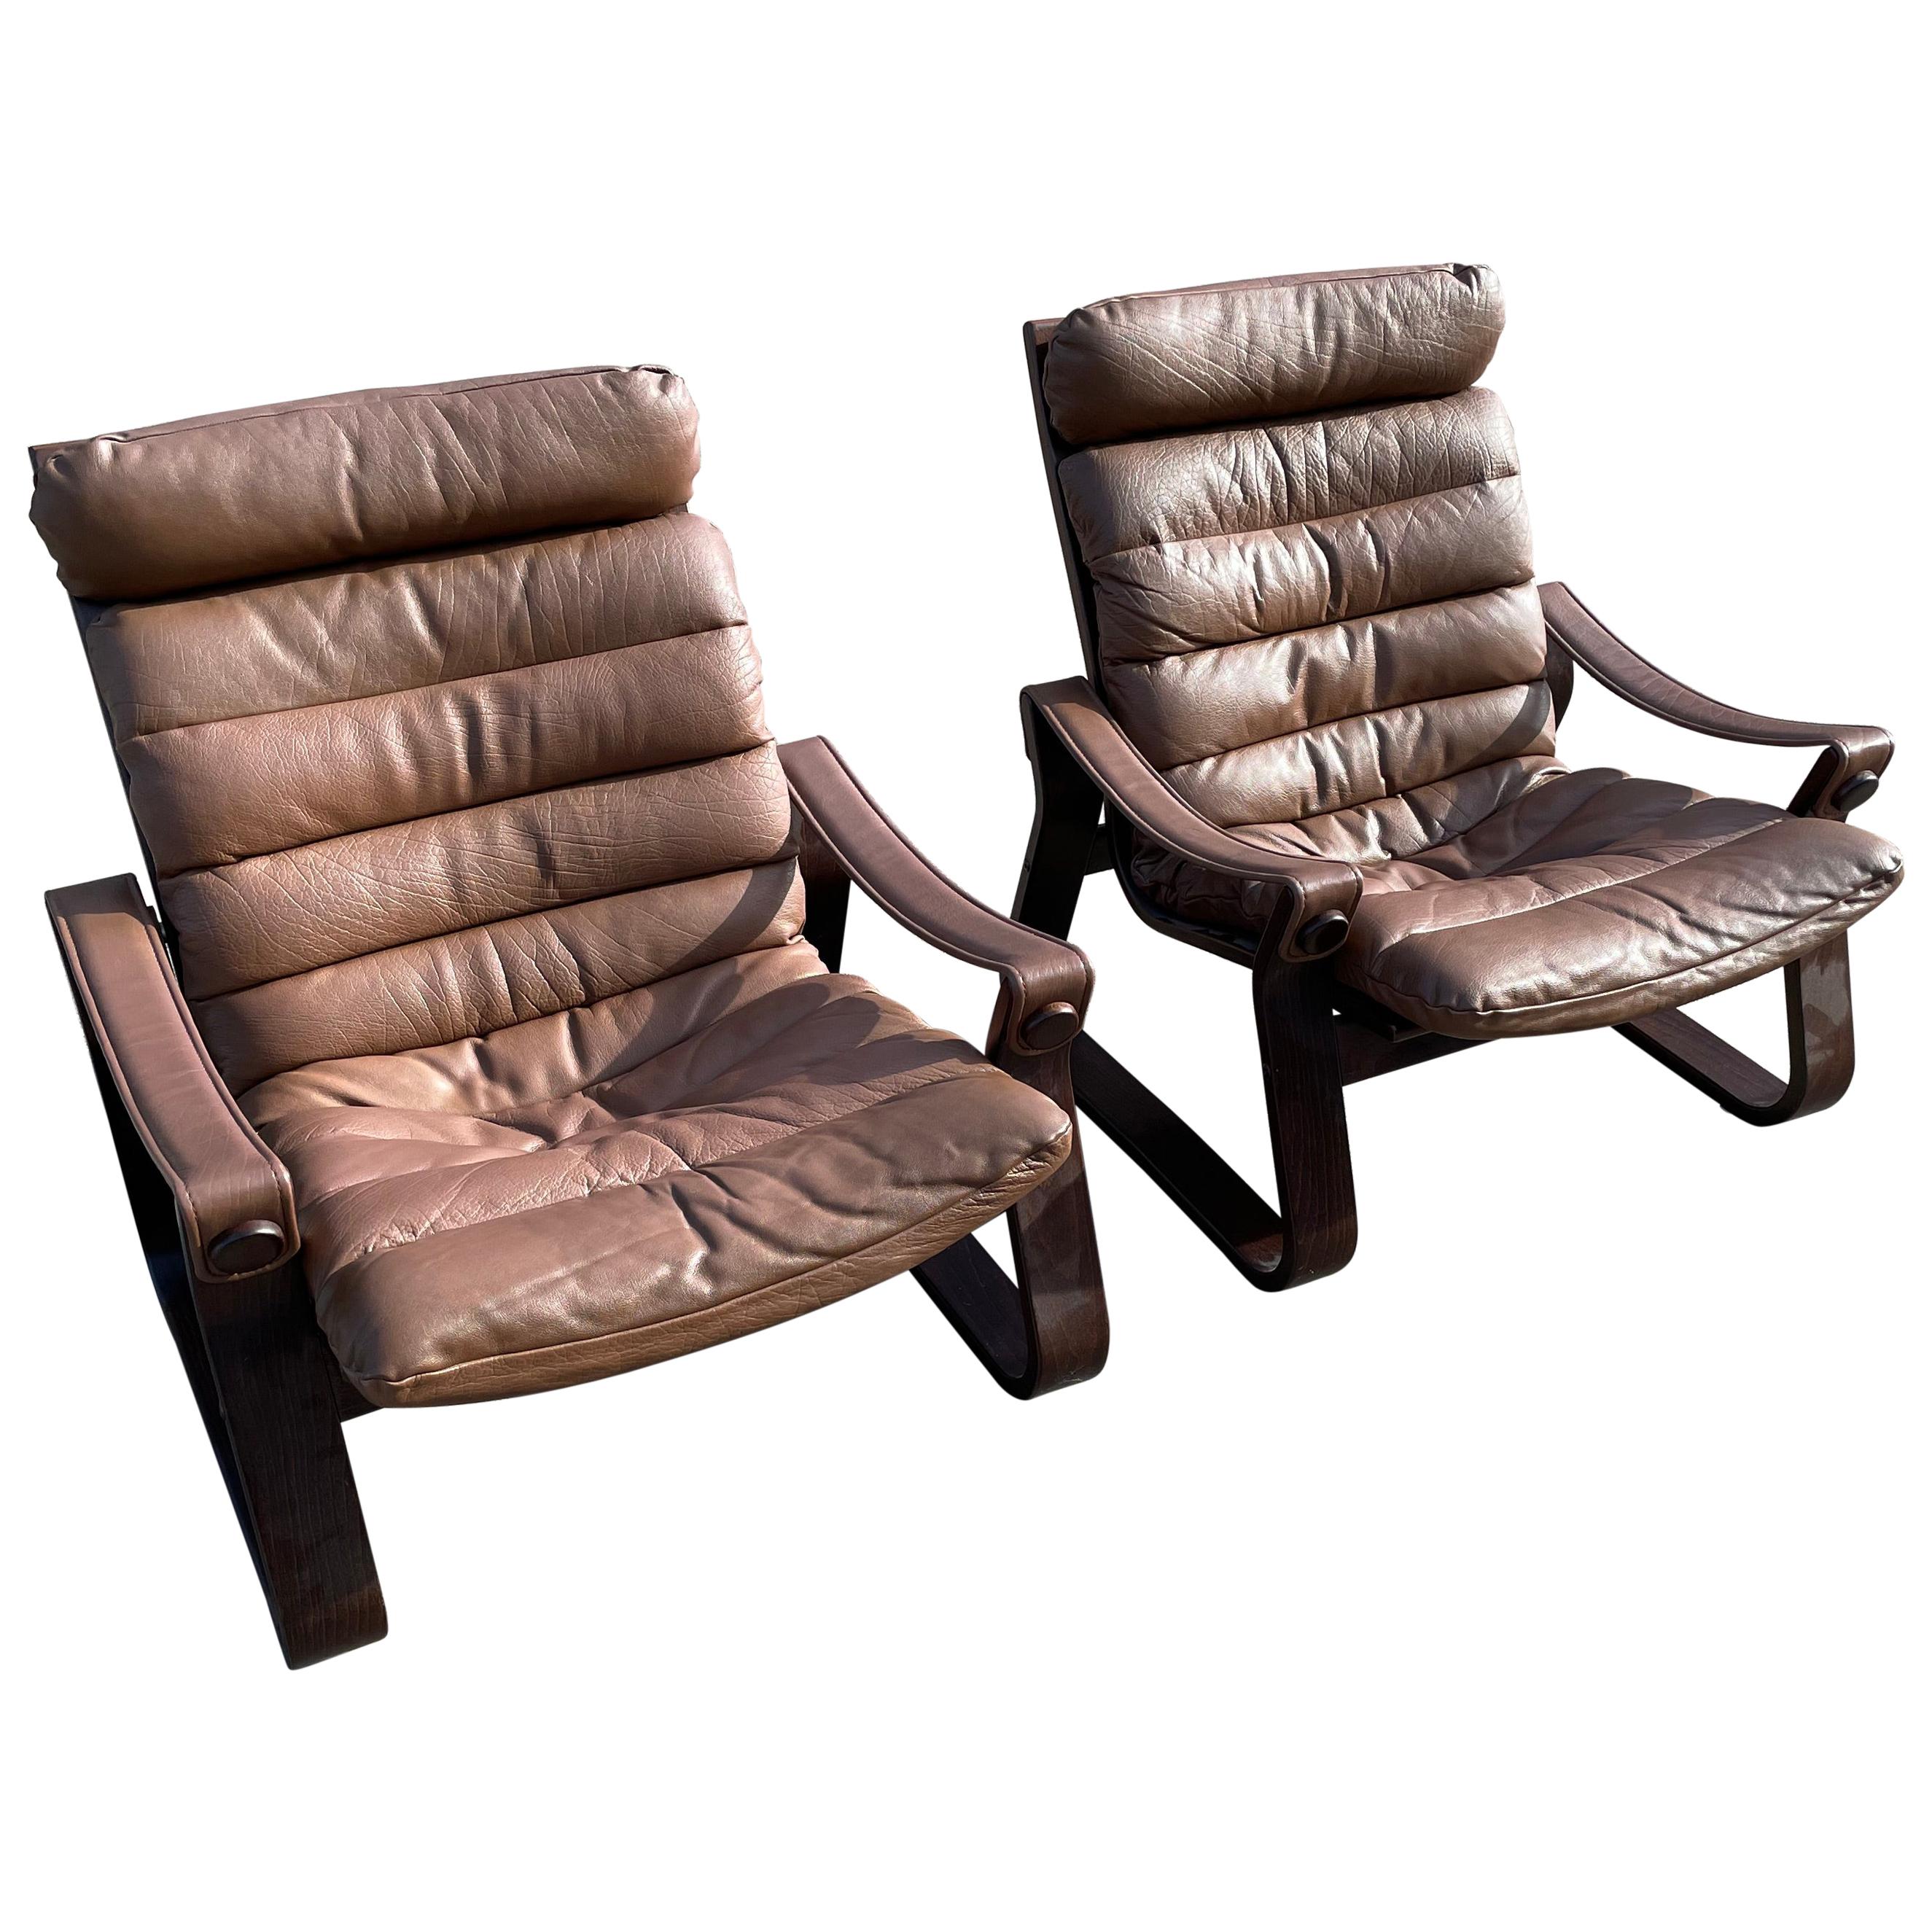 Pair of 1970s Adjustable Vintage Lounge Chairs